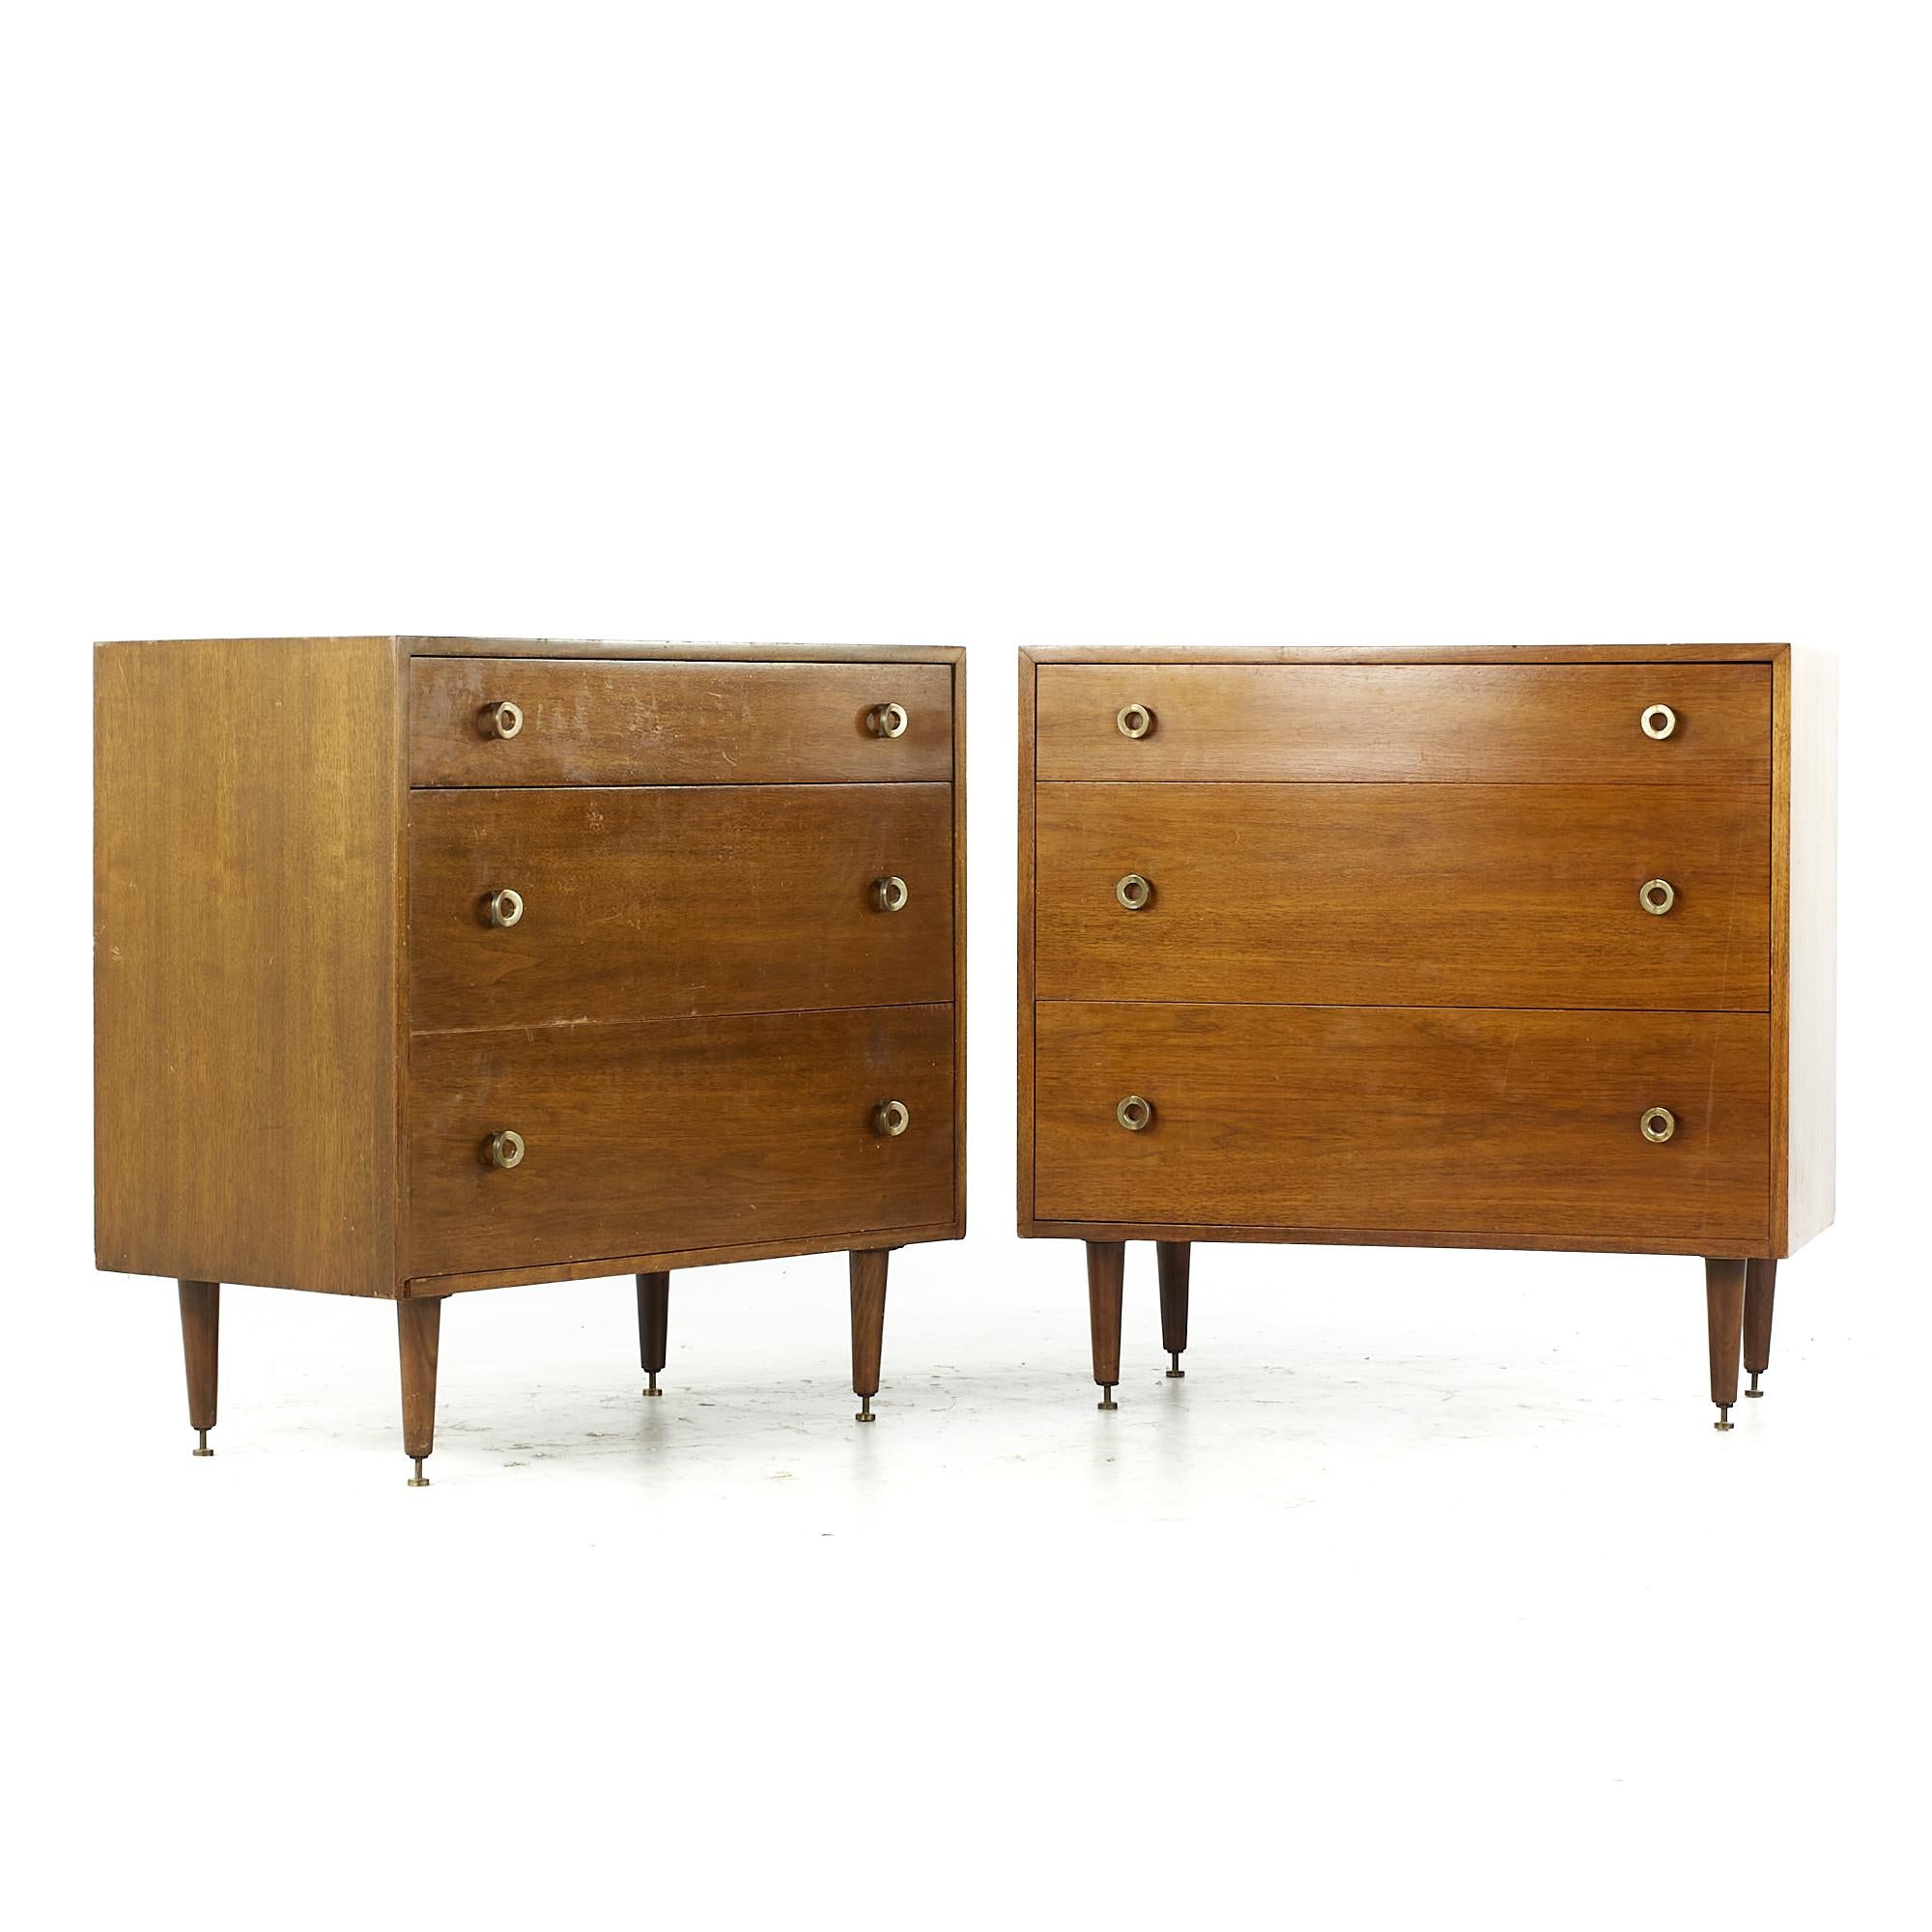 Greta Grossman for Glenn of California midcentury walnut 3 drawer chest - pair

Each chest measures: 32.75 wide x 18 deep x 32.75 inches high

All pieces of furniture can be had in what we call restored vintage condition. That means the piece is